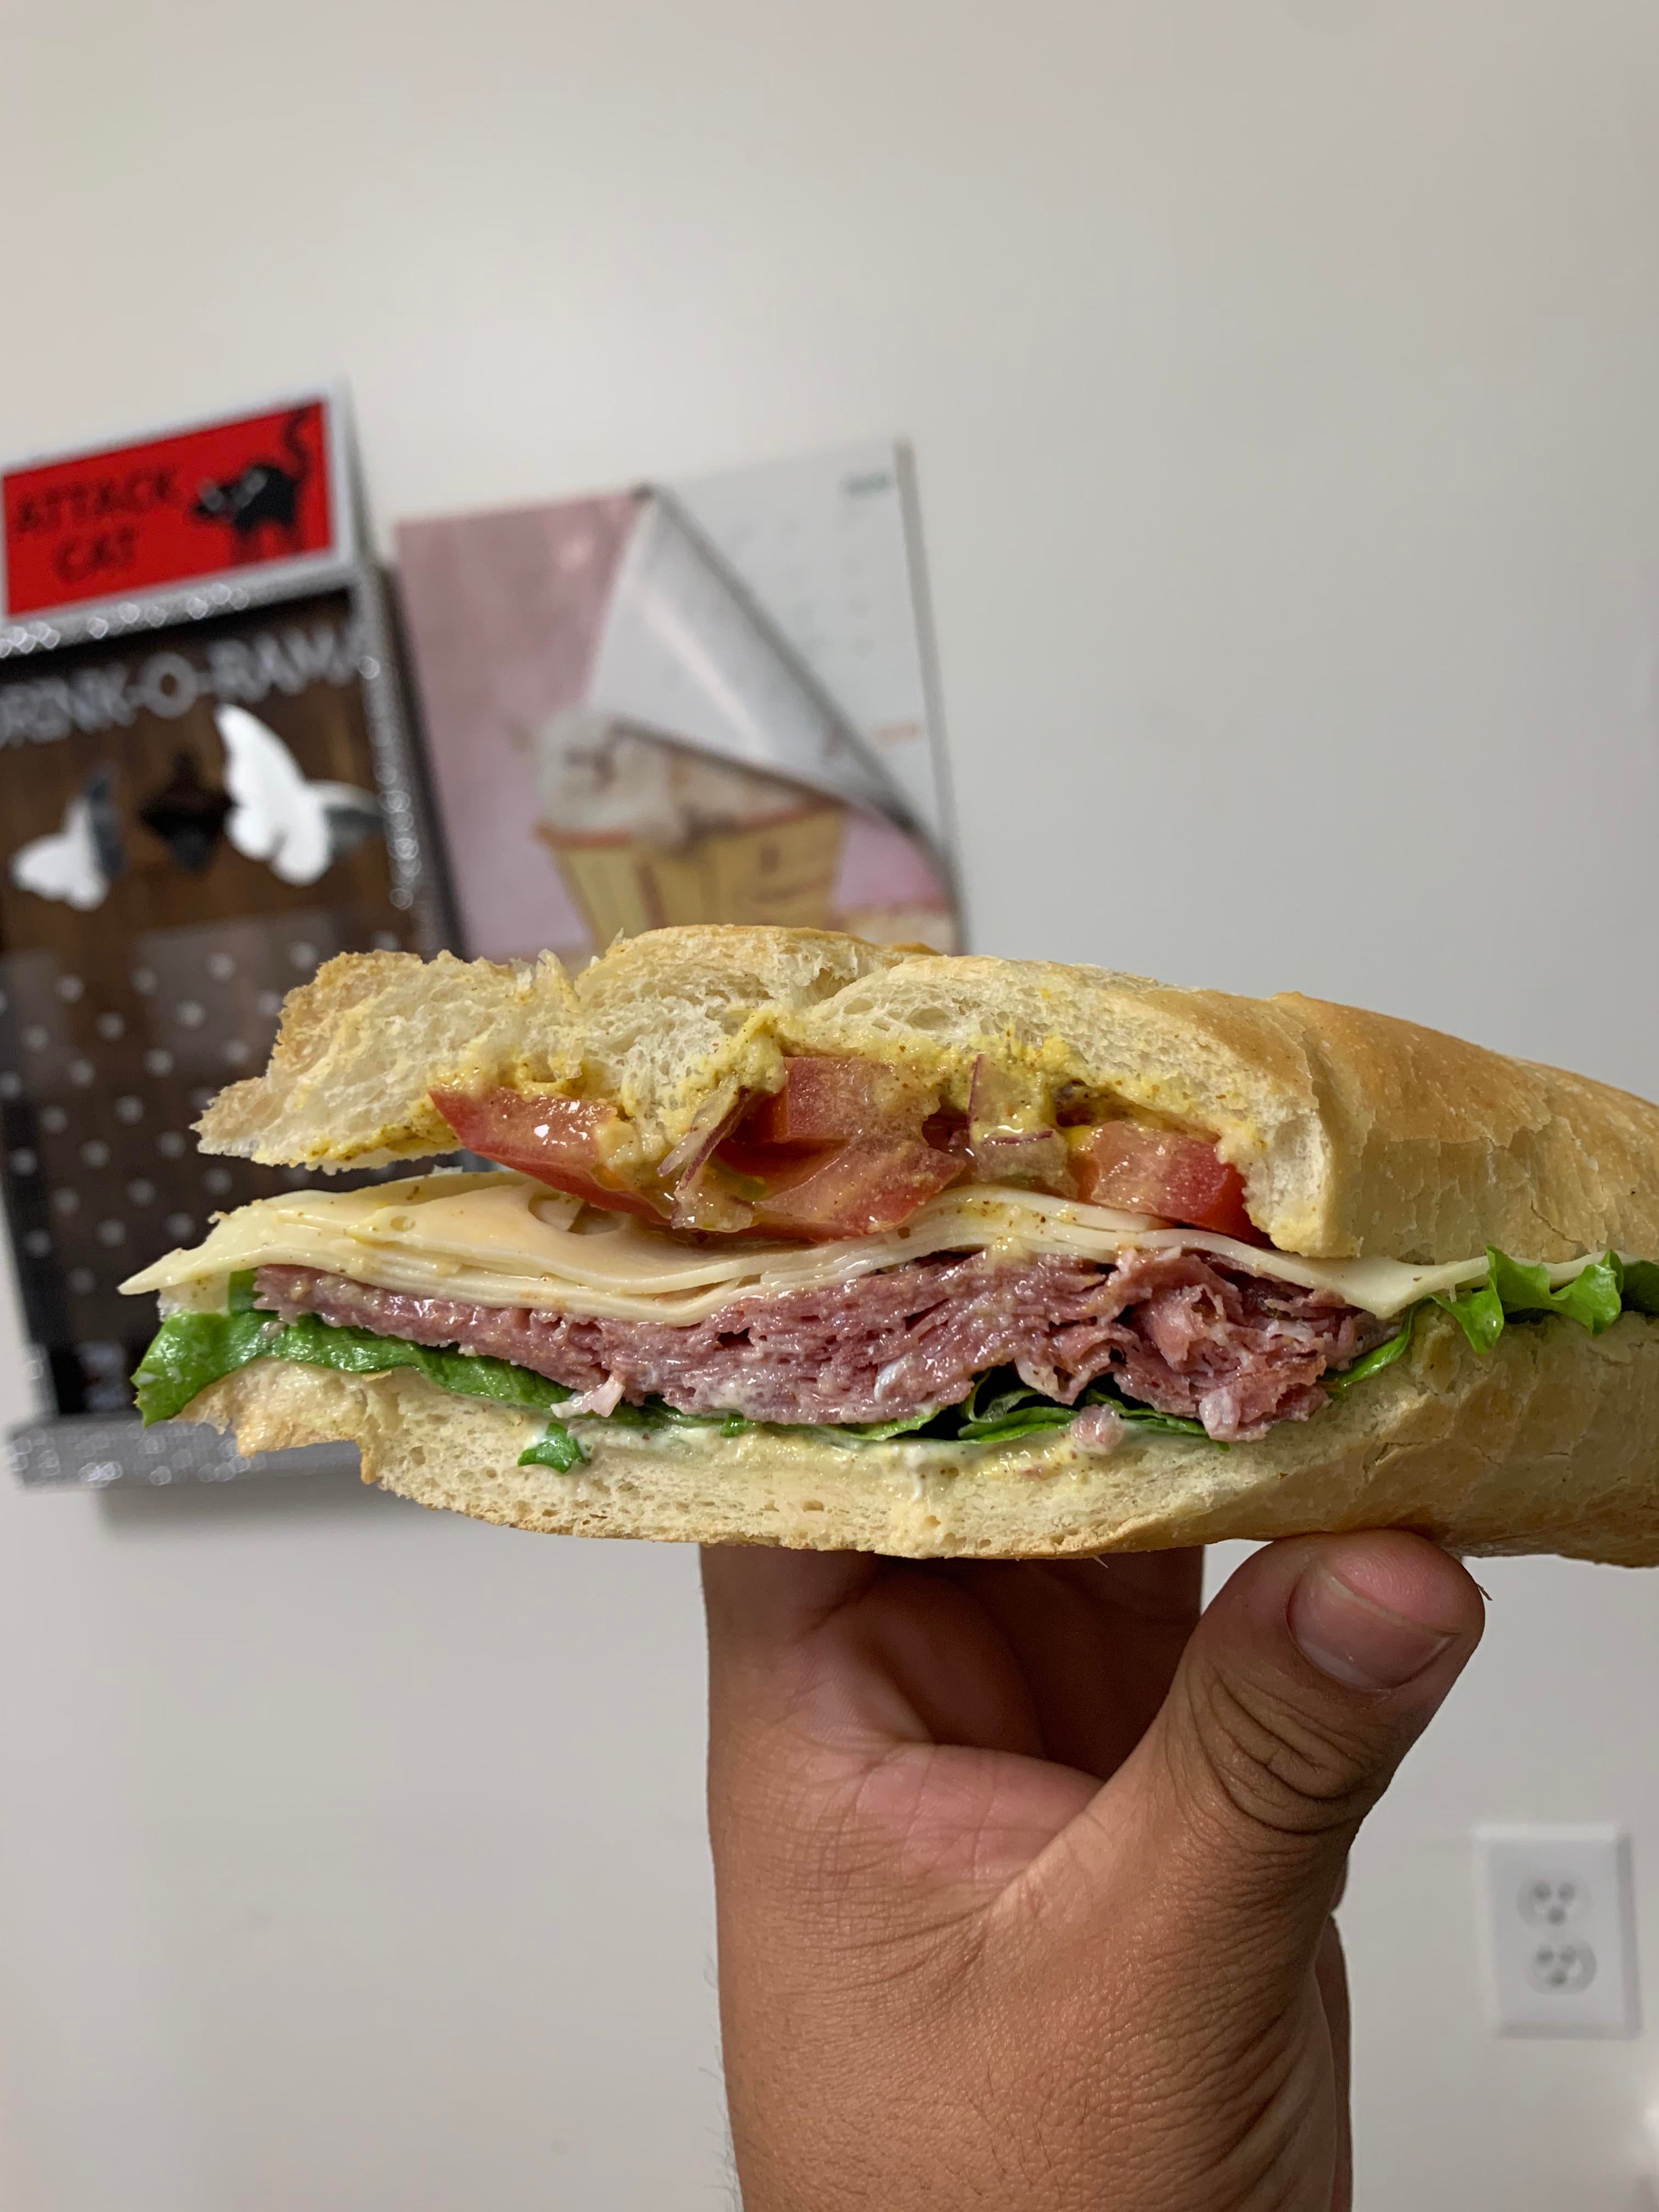 Salami sandwich with spicy mustard, tomato, lettuce, and Mayo. 10/10 ...